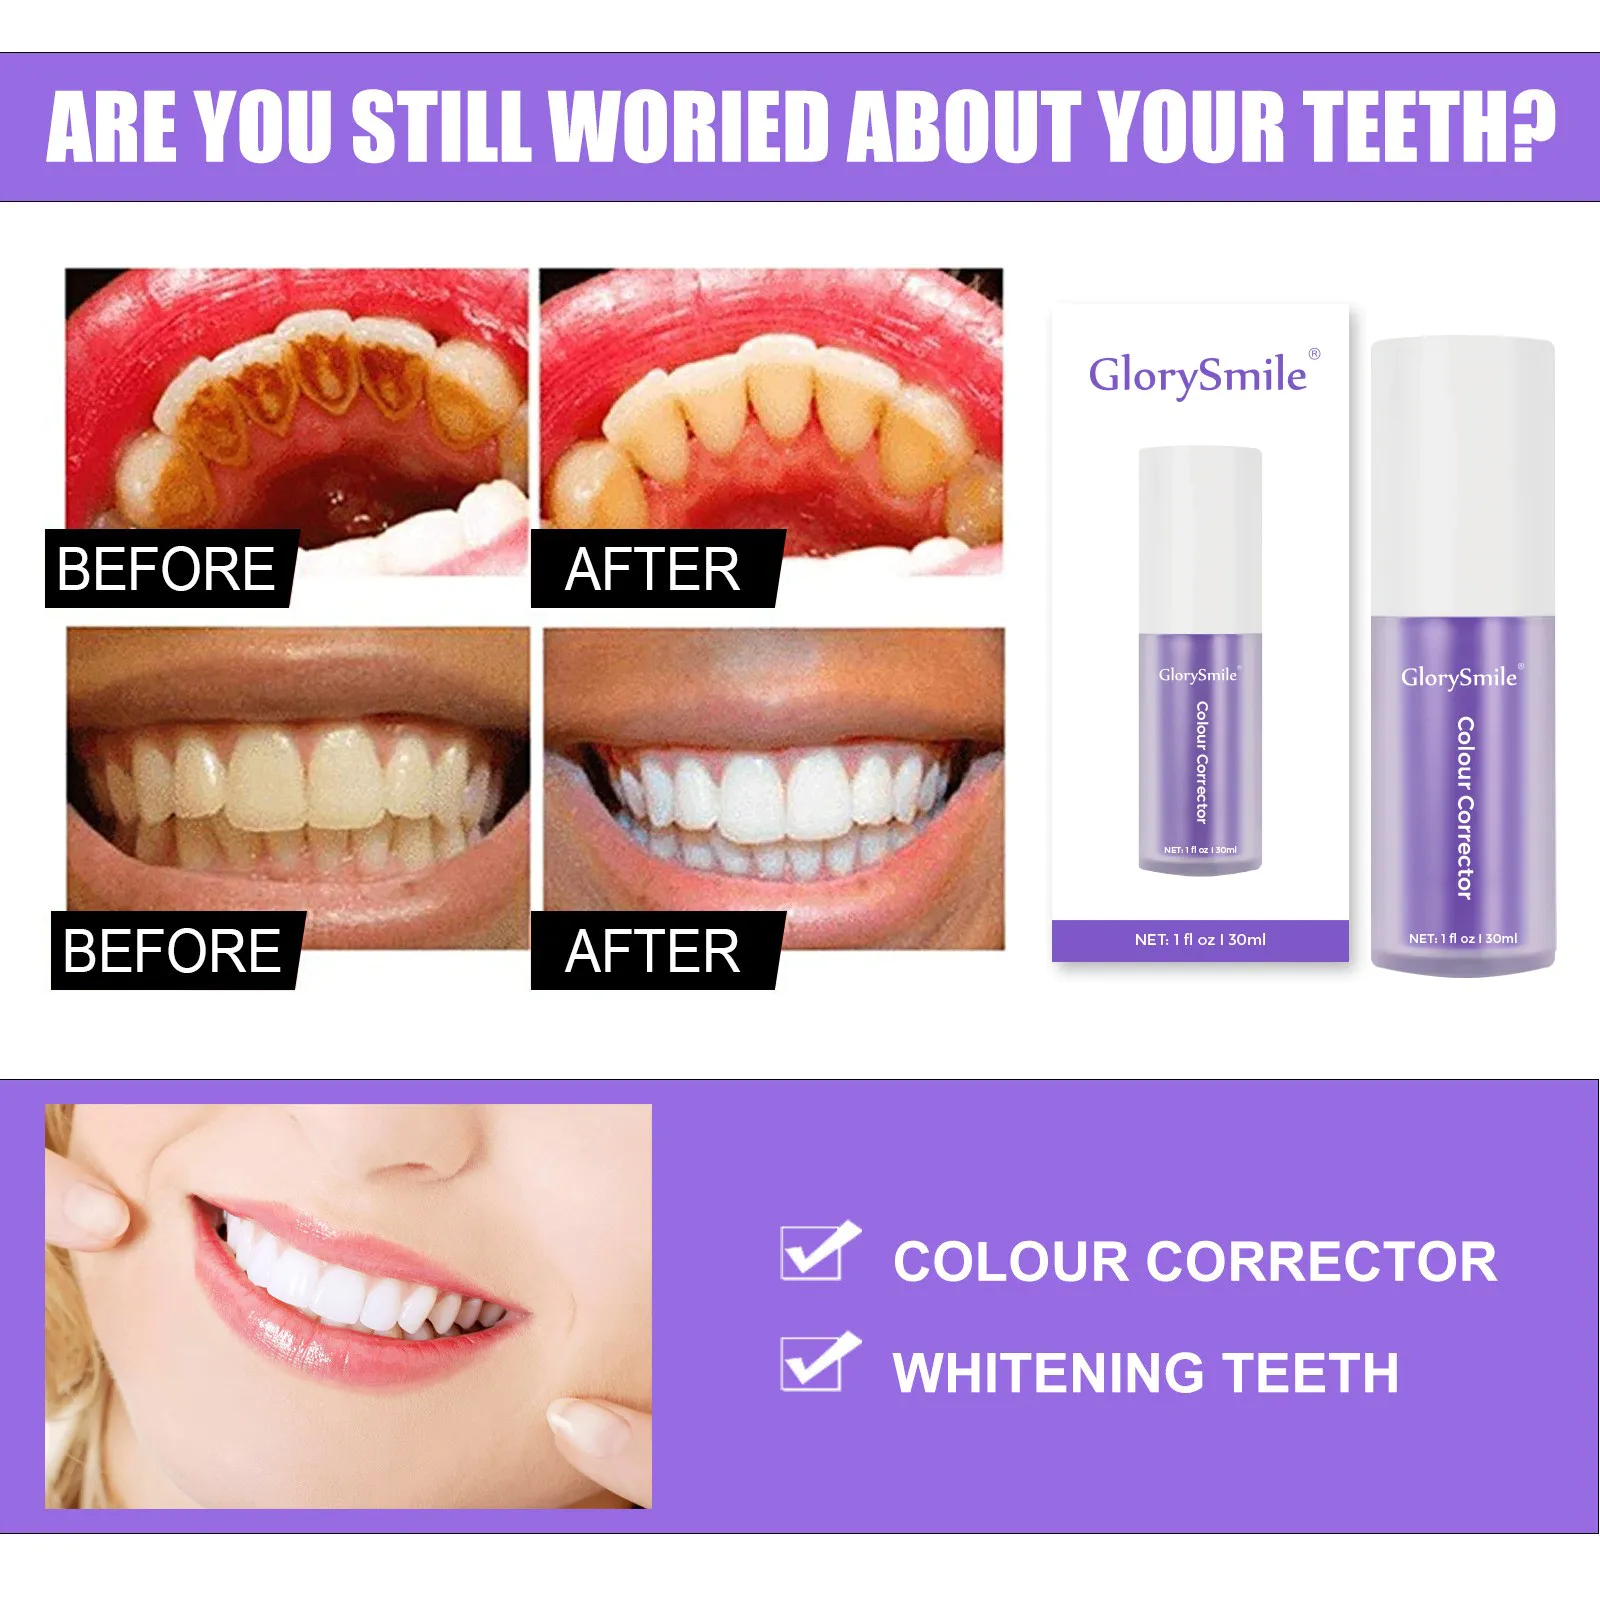 Latest V34 Colour Corrector Suppliers for whitening teeth